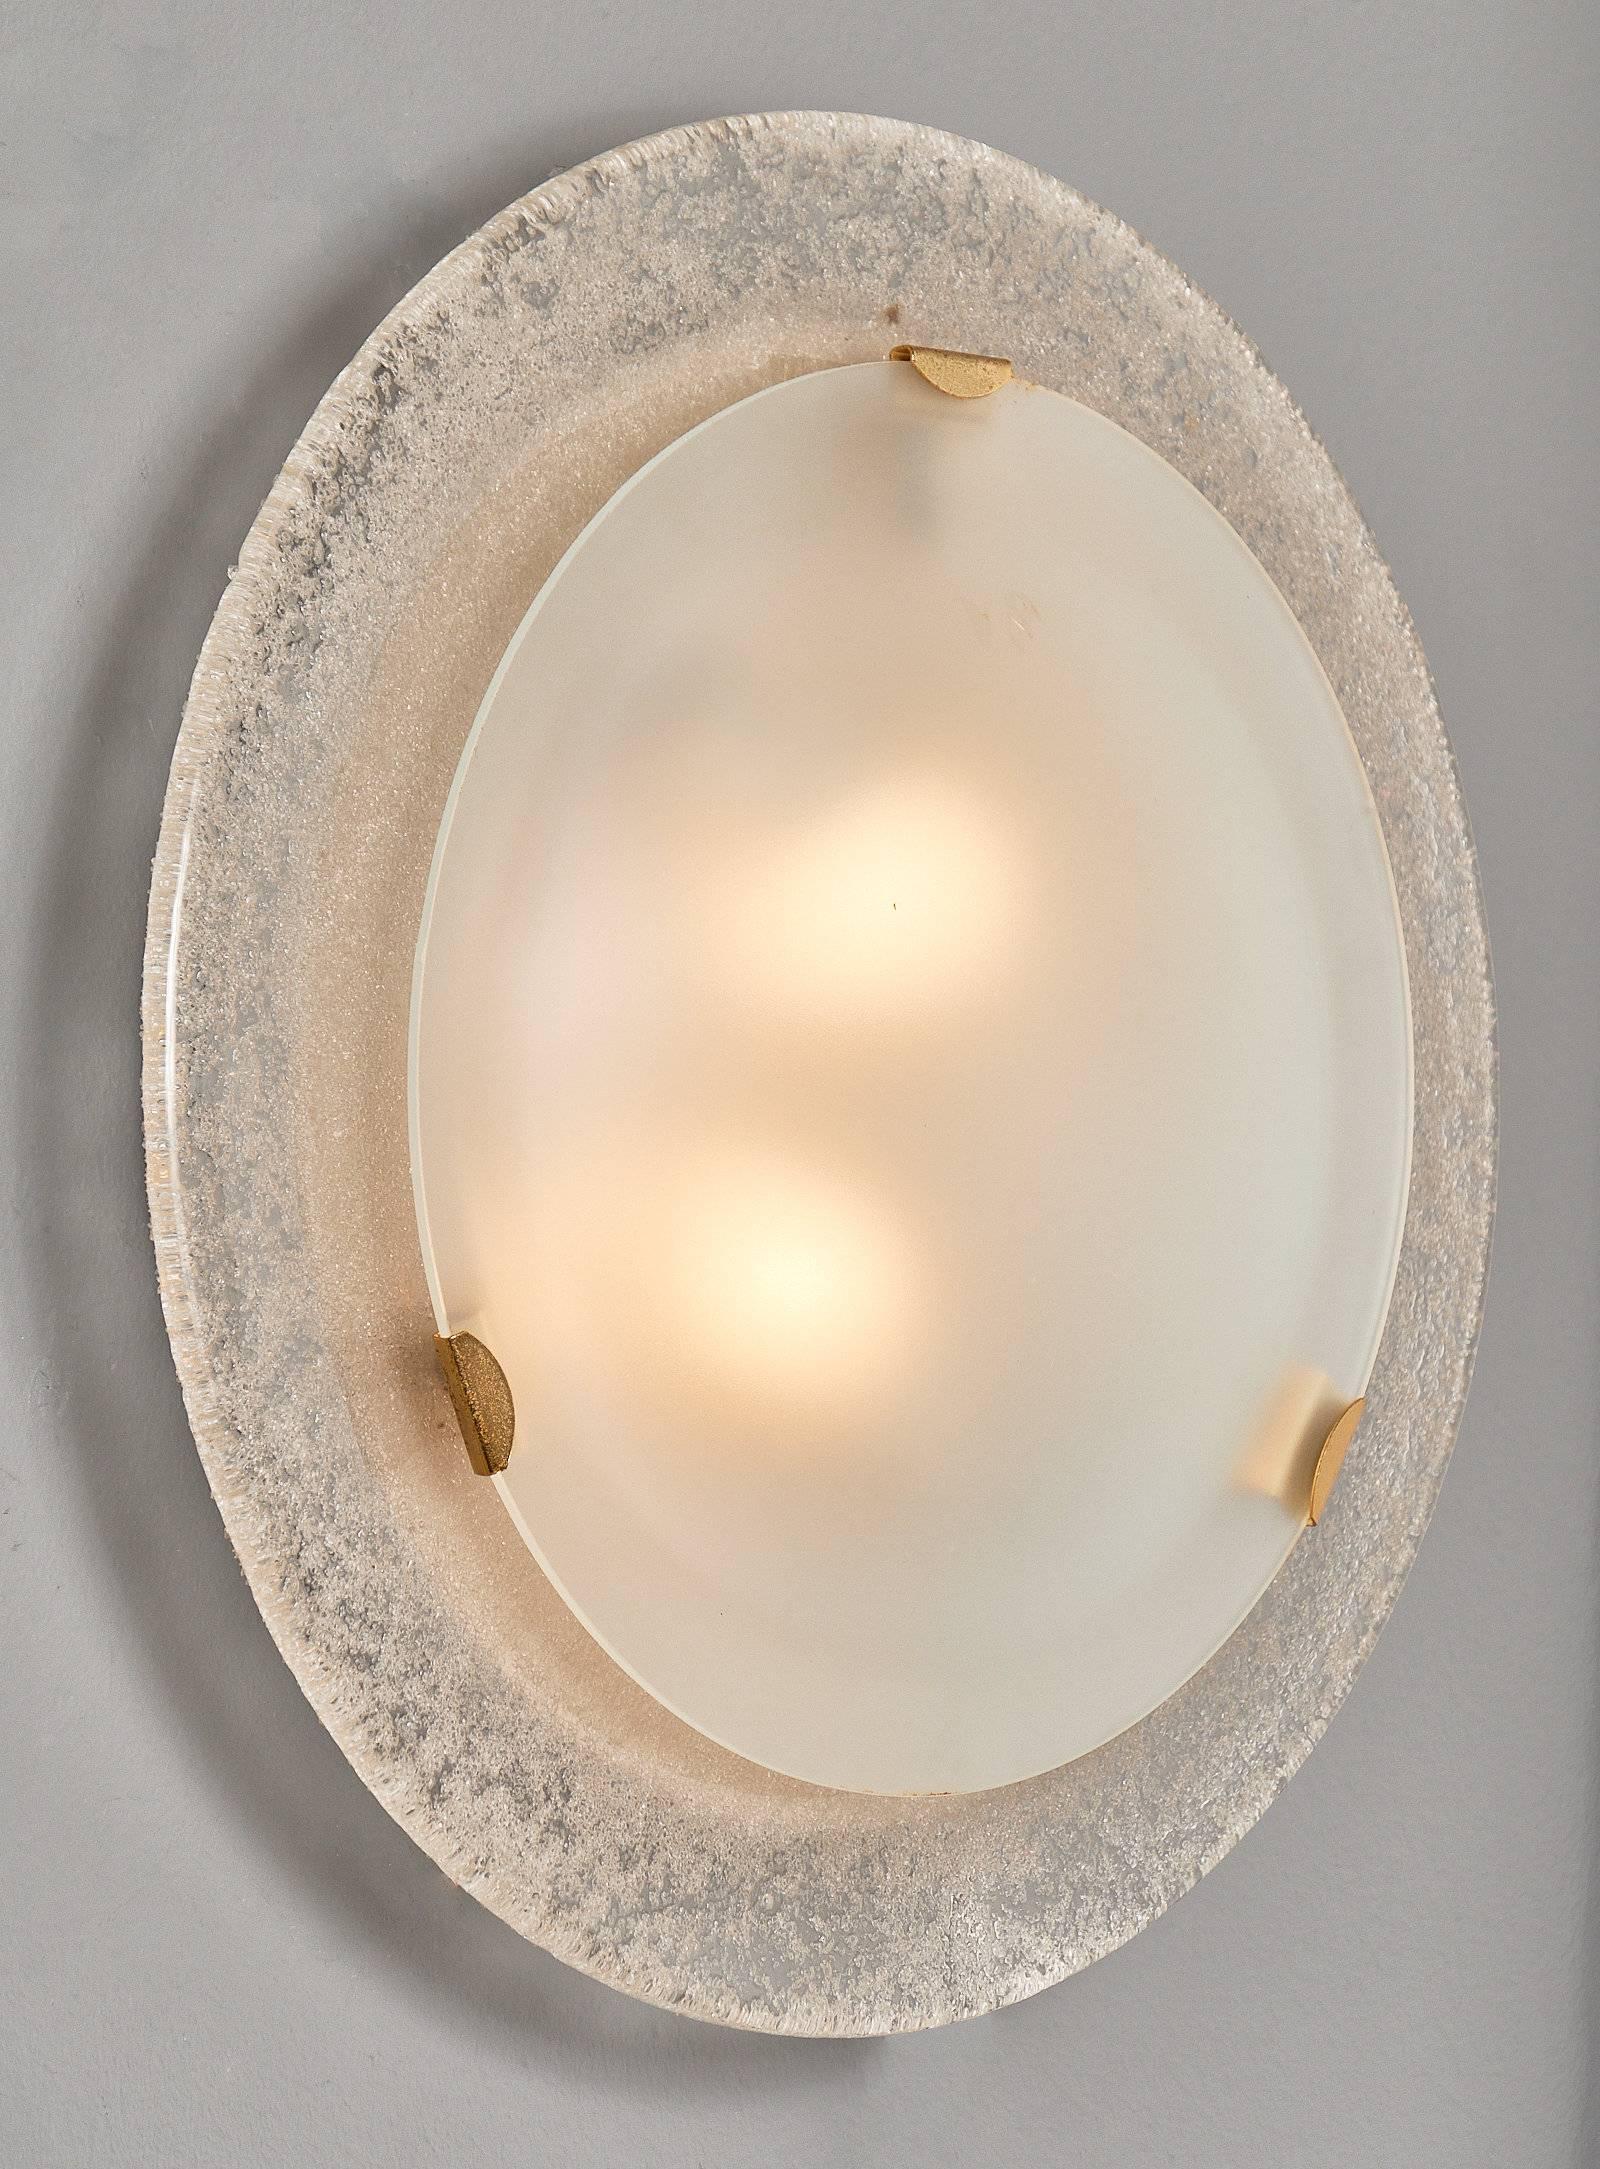 Pair of vintage Murano glass round wall sconces. We love the spherical forms combining frosted and textured glass. Brass hardware accent the pair. These sconces have been wired to fit US standards.